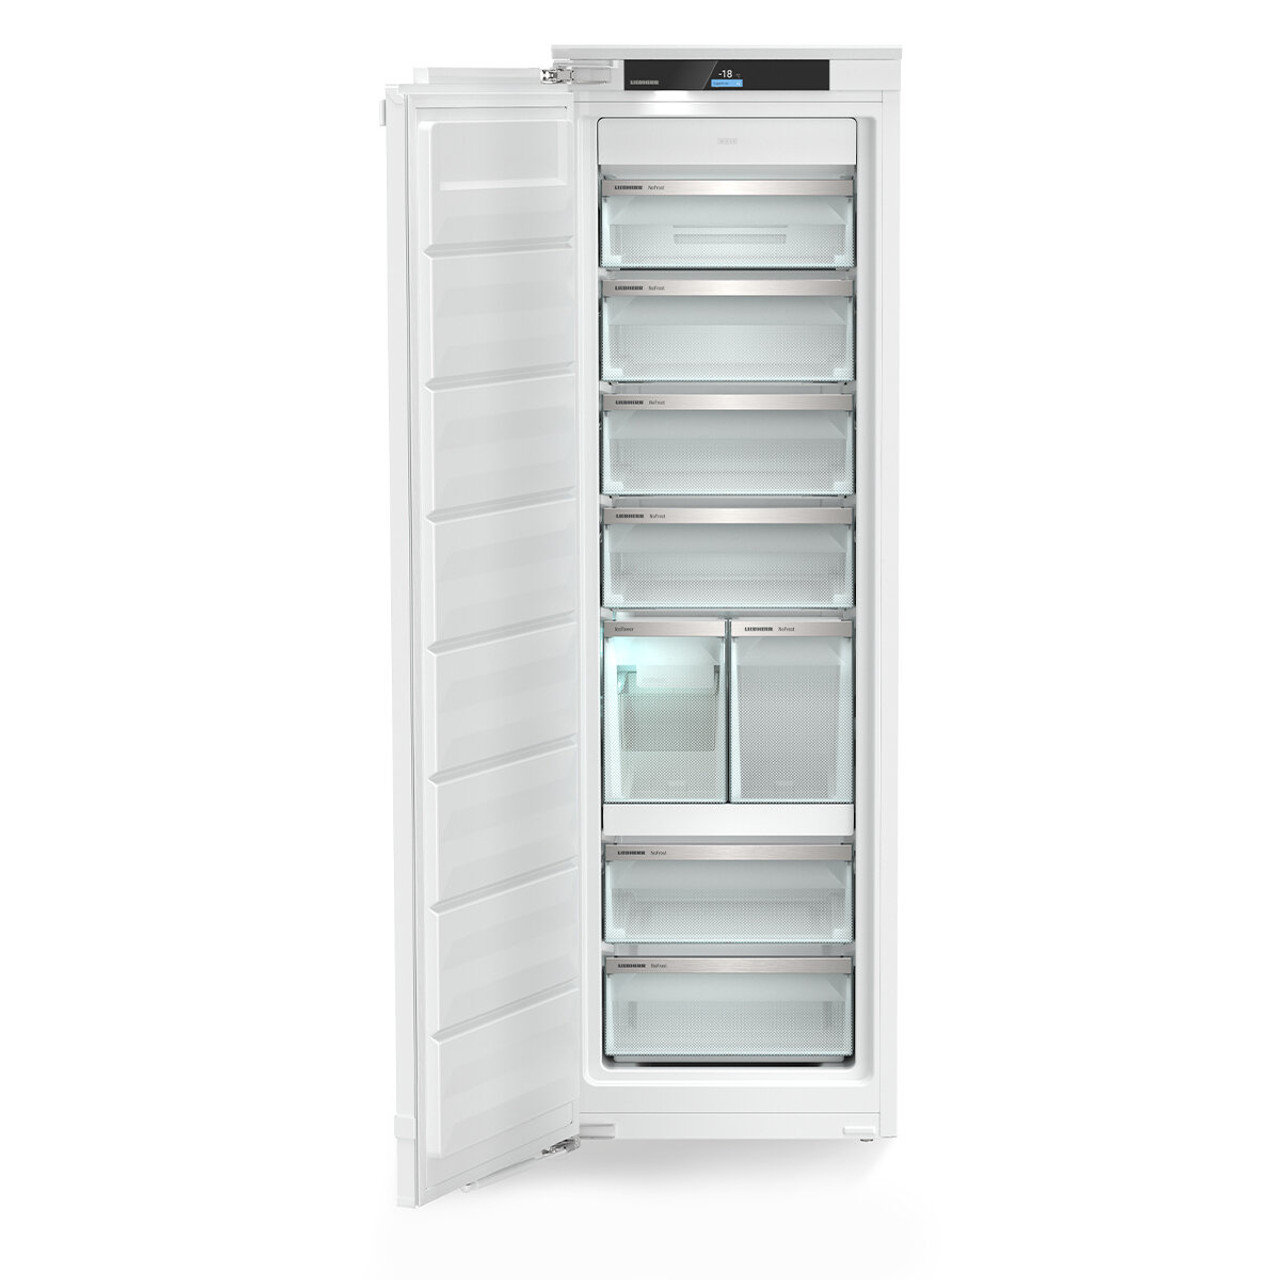 SIFNH5188LH - Liebherr 213L Integrated Upright Freezer with NoFrost Left Hinge - White